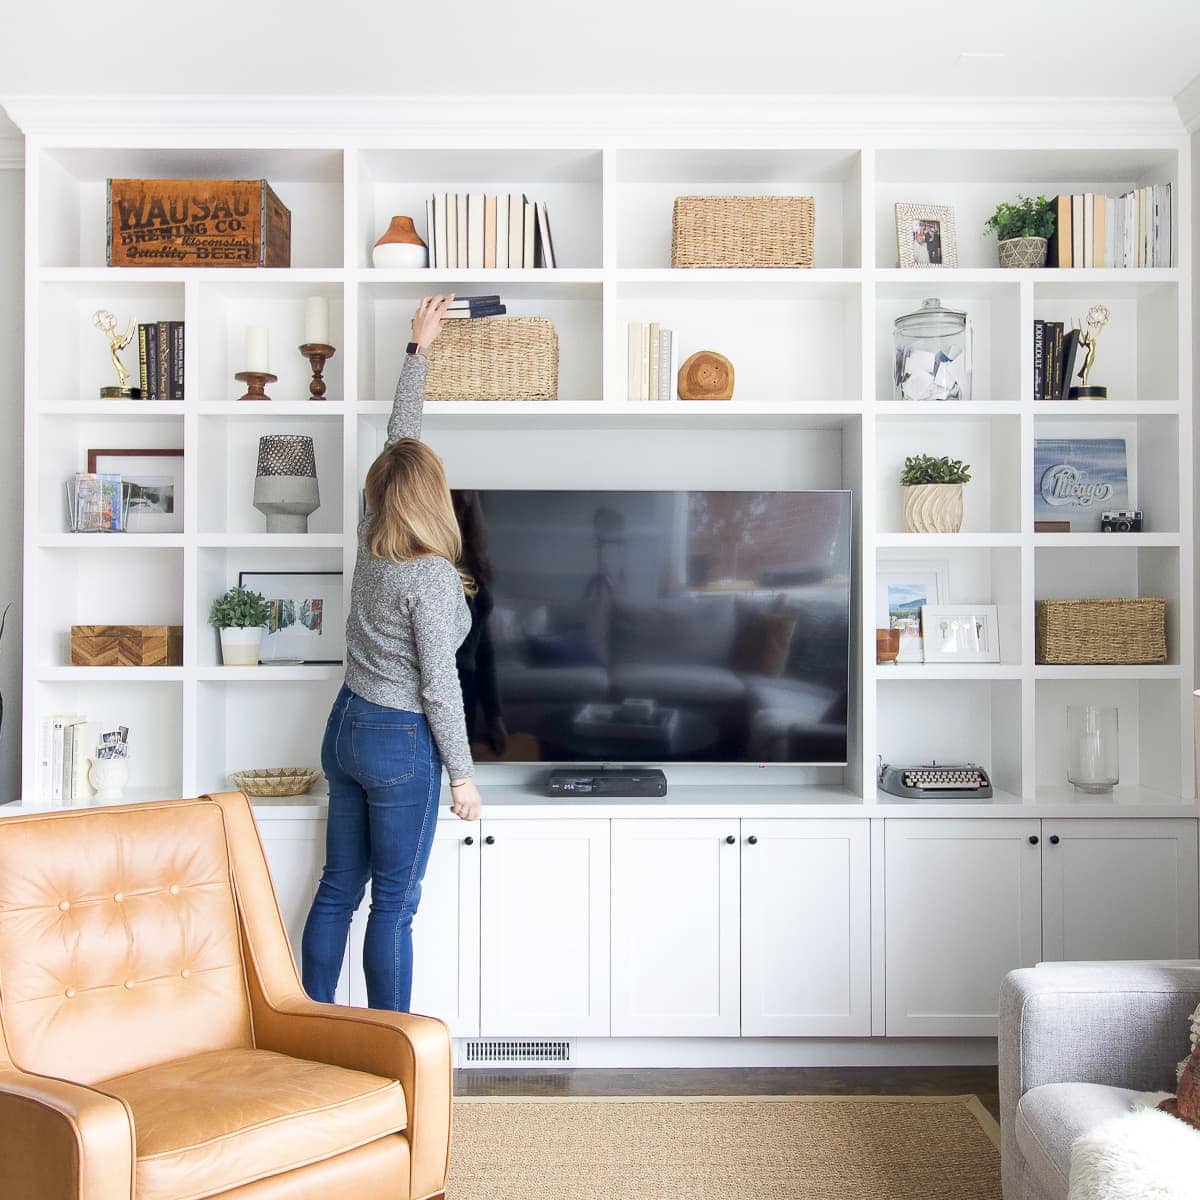 Fixing awkward spaces with built-ins